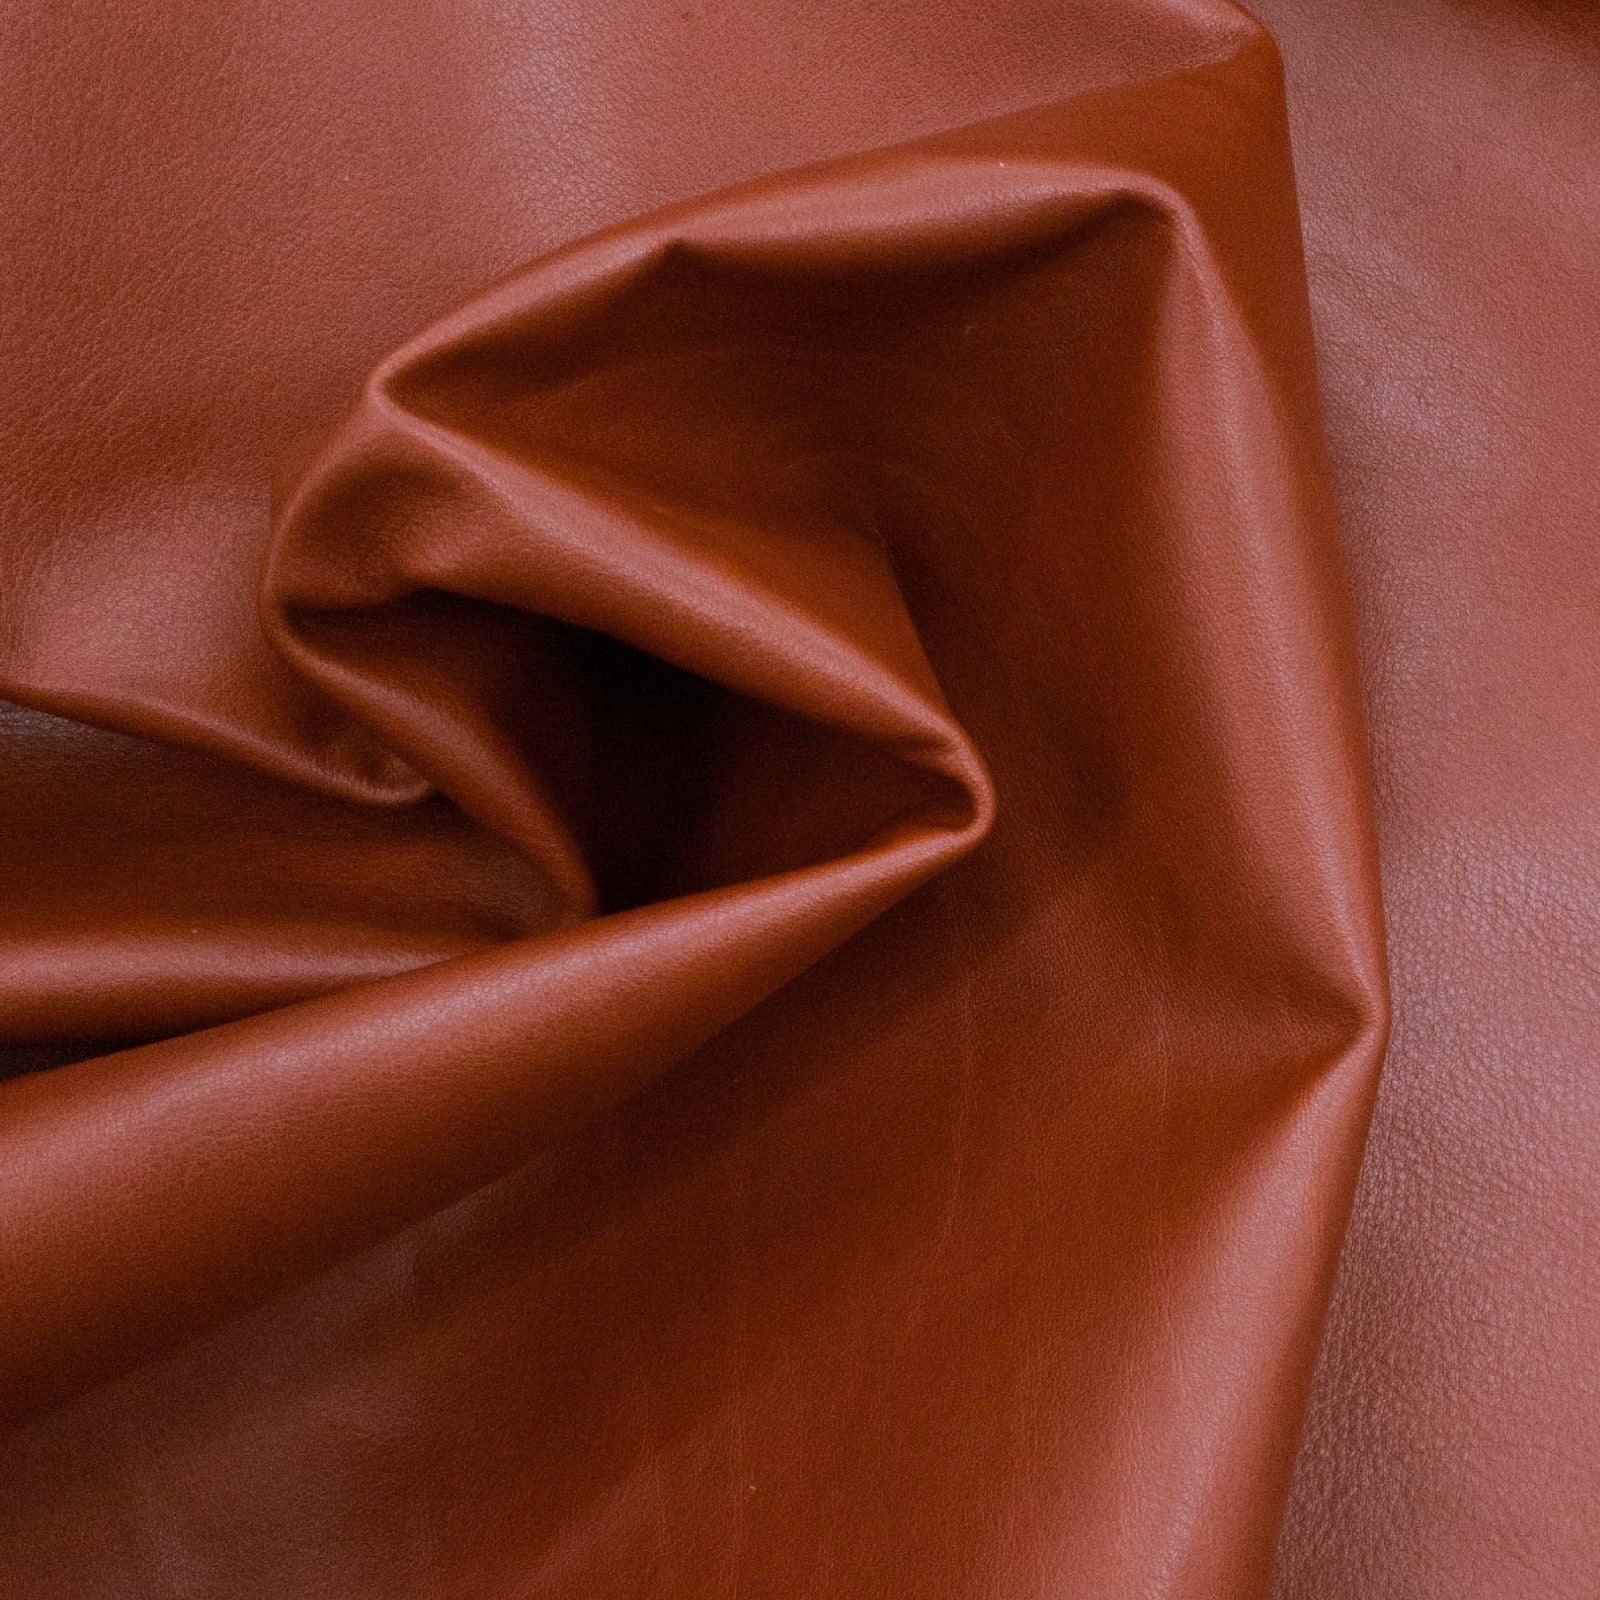 Red, 2-4 oz, 33-64 SqFt, Full Upholstery Cow Hides, Ripe Red / 41-48 / 2-3 | The Leather Guy